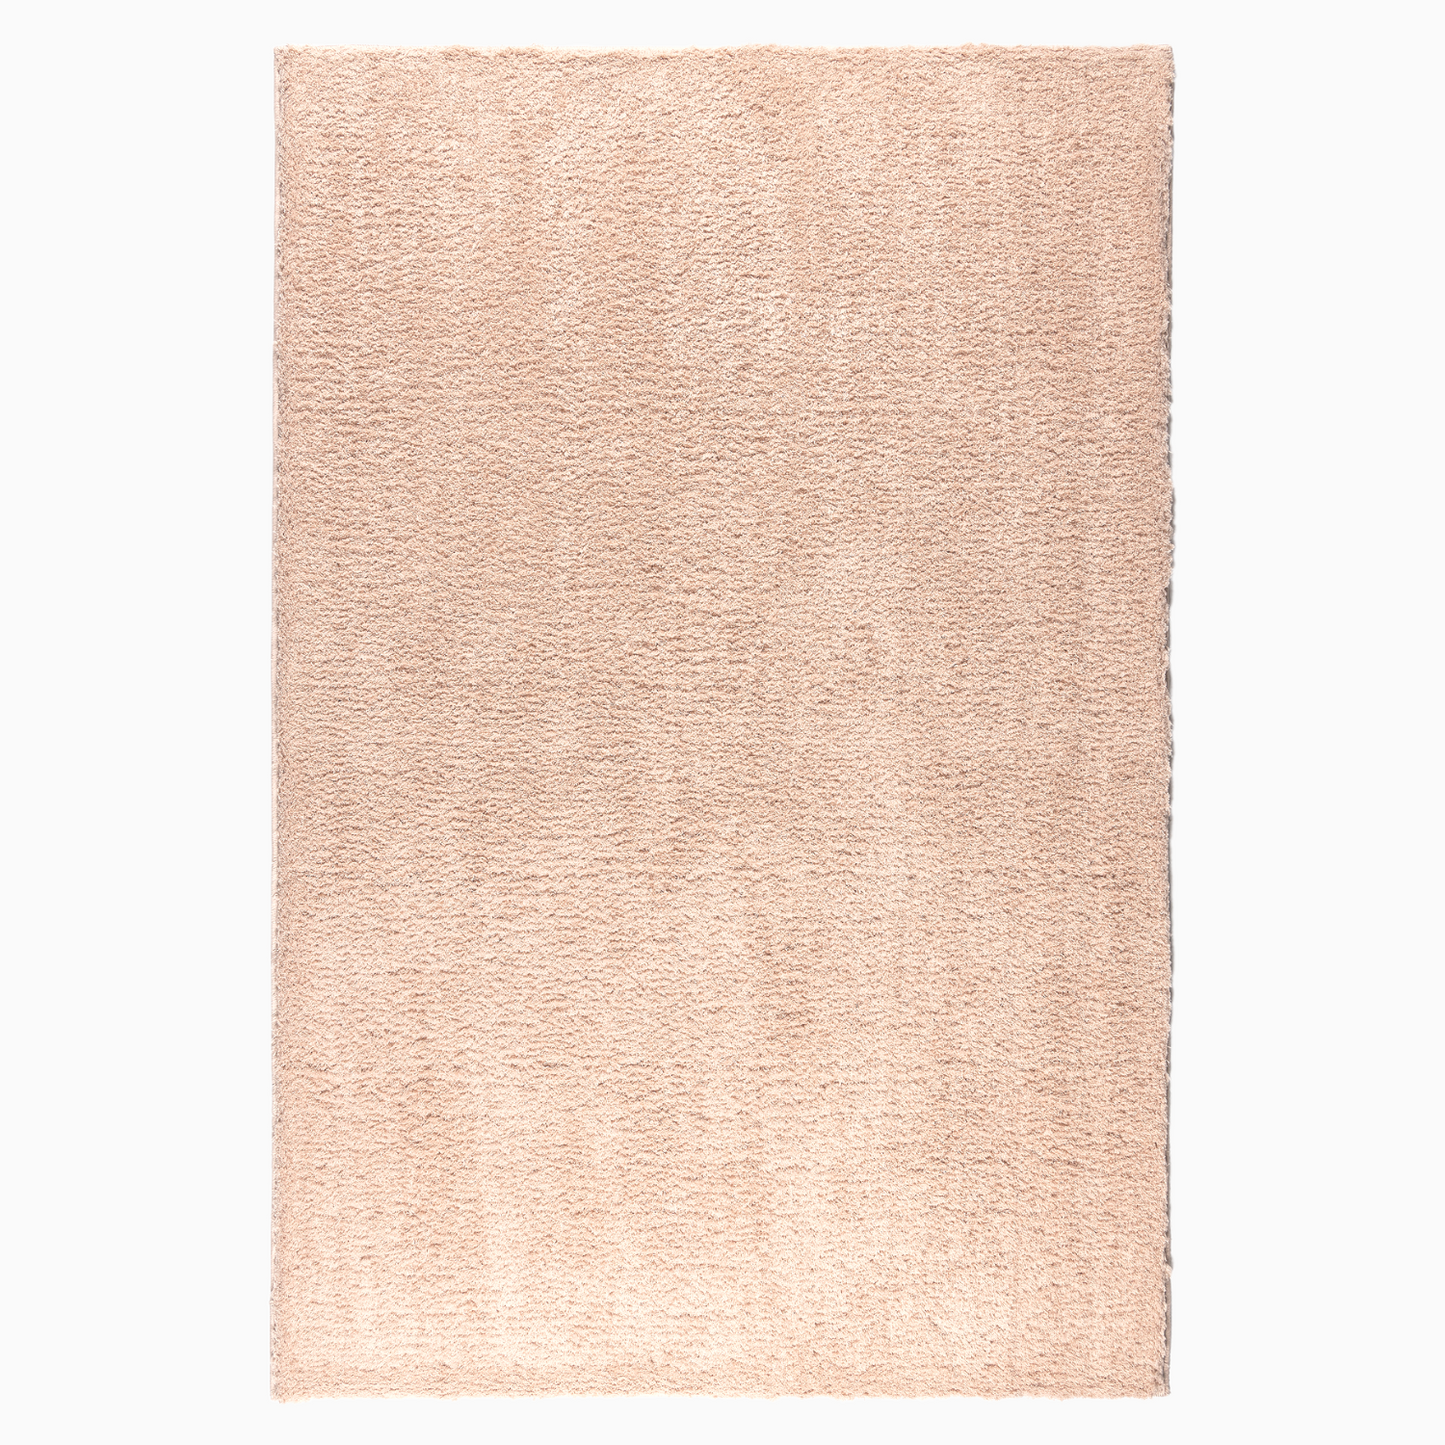 Blush Pink Splendor Rug,Super Soft Area Rugs for Home and Office